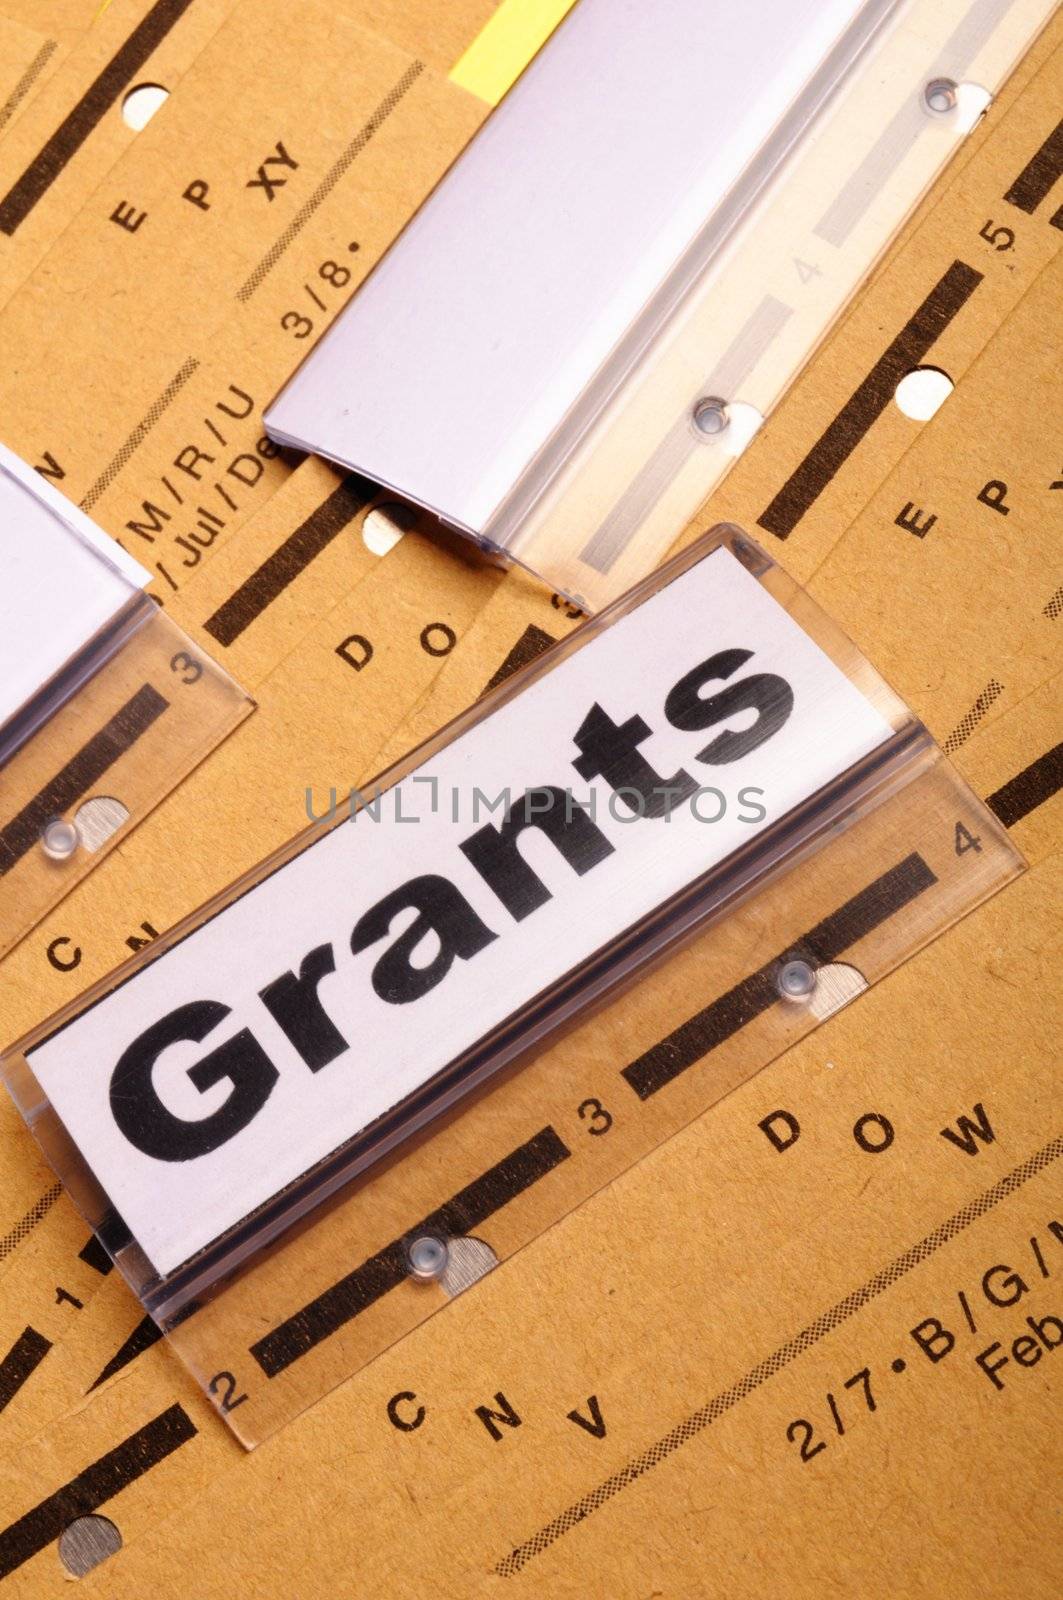 grants word on paper folder showing scholarship or higher education concept